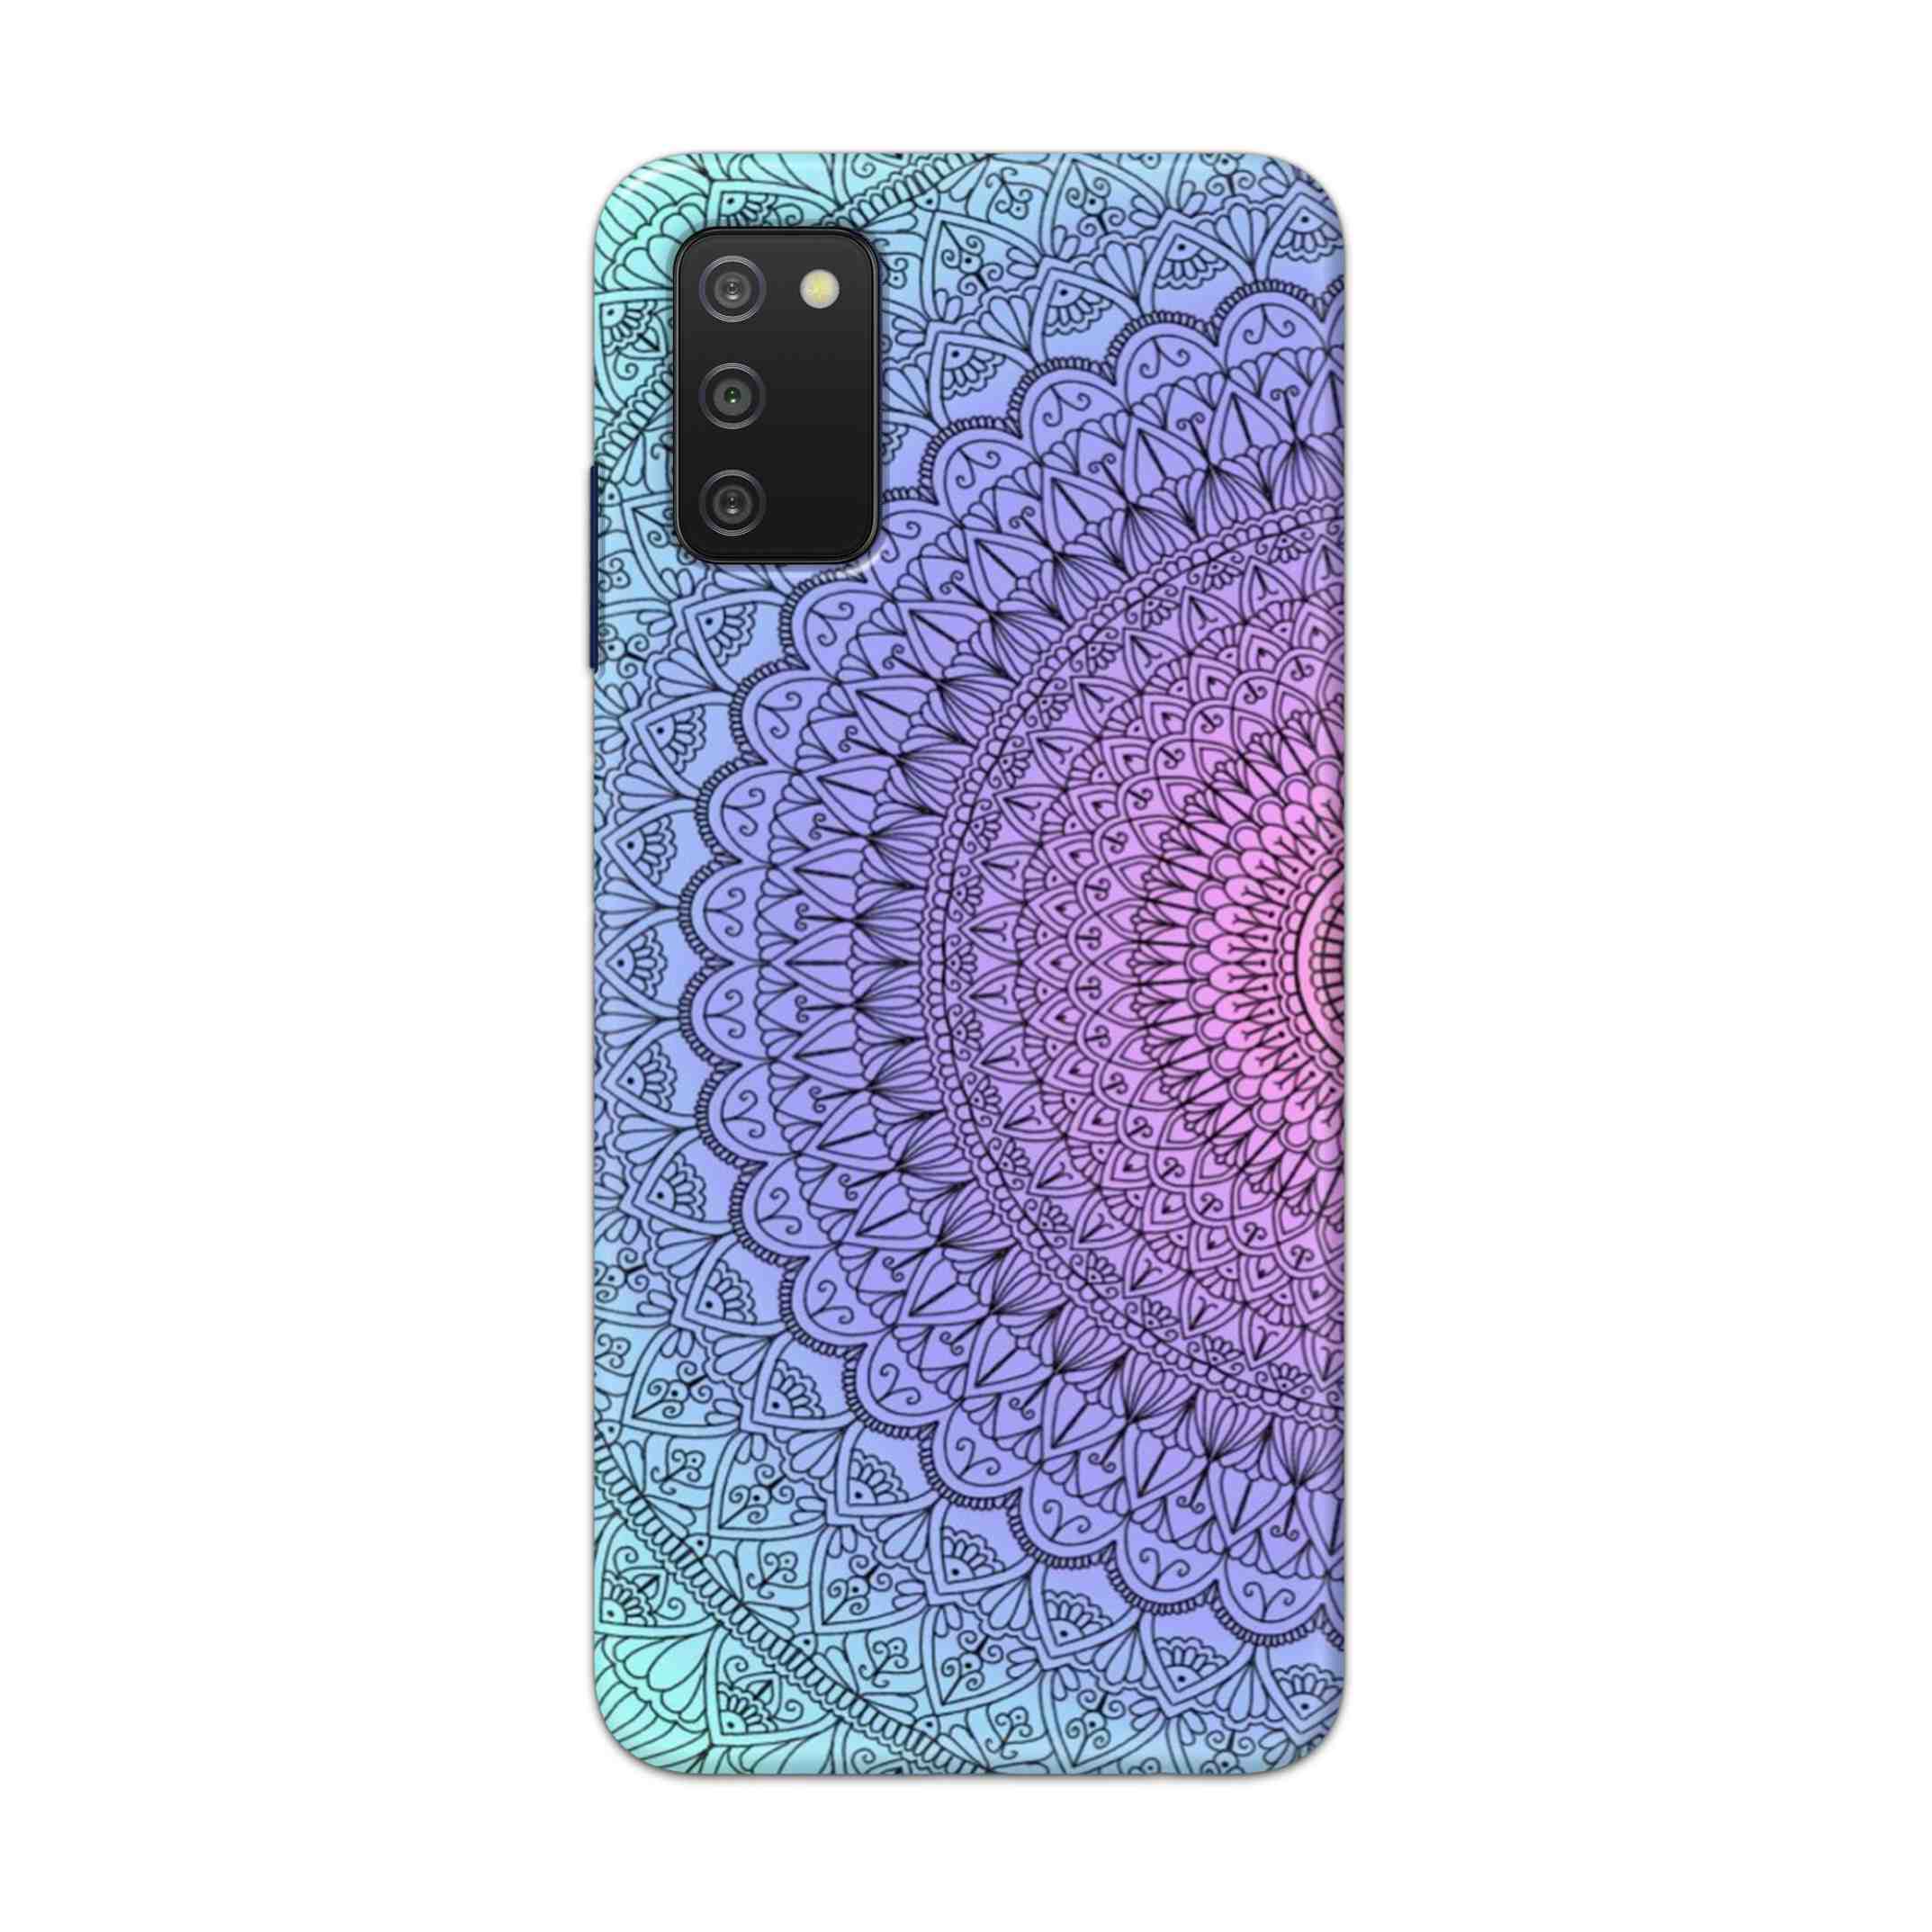 Buy Colourful Mandala Hard Back Mobile Phone Case Cover For Samsung A03s Online